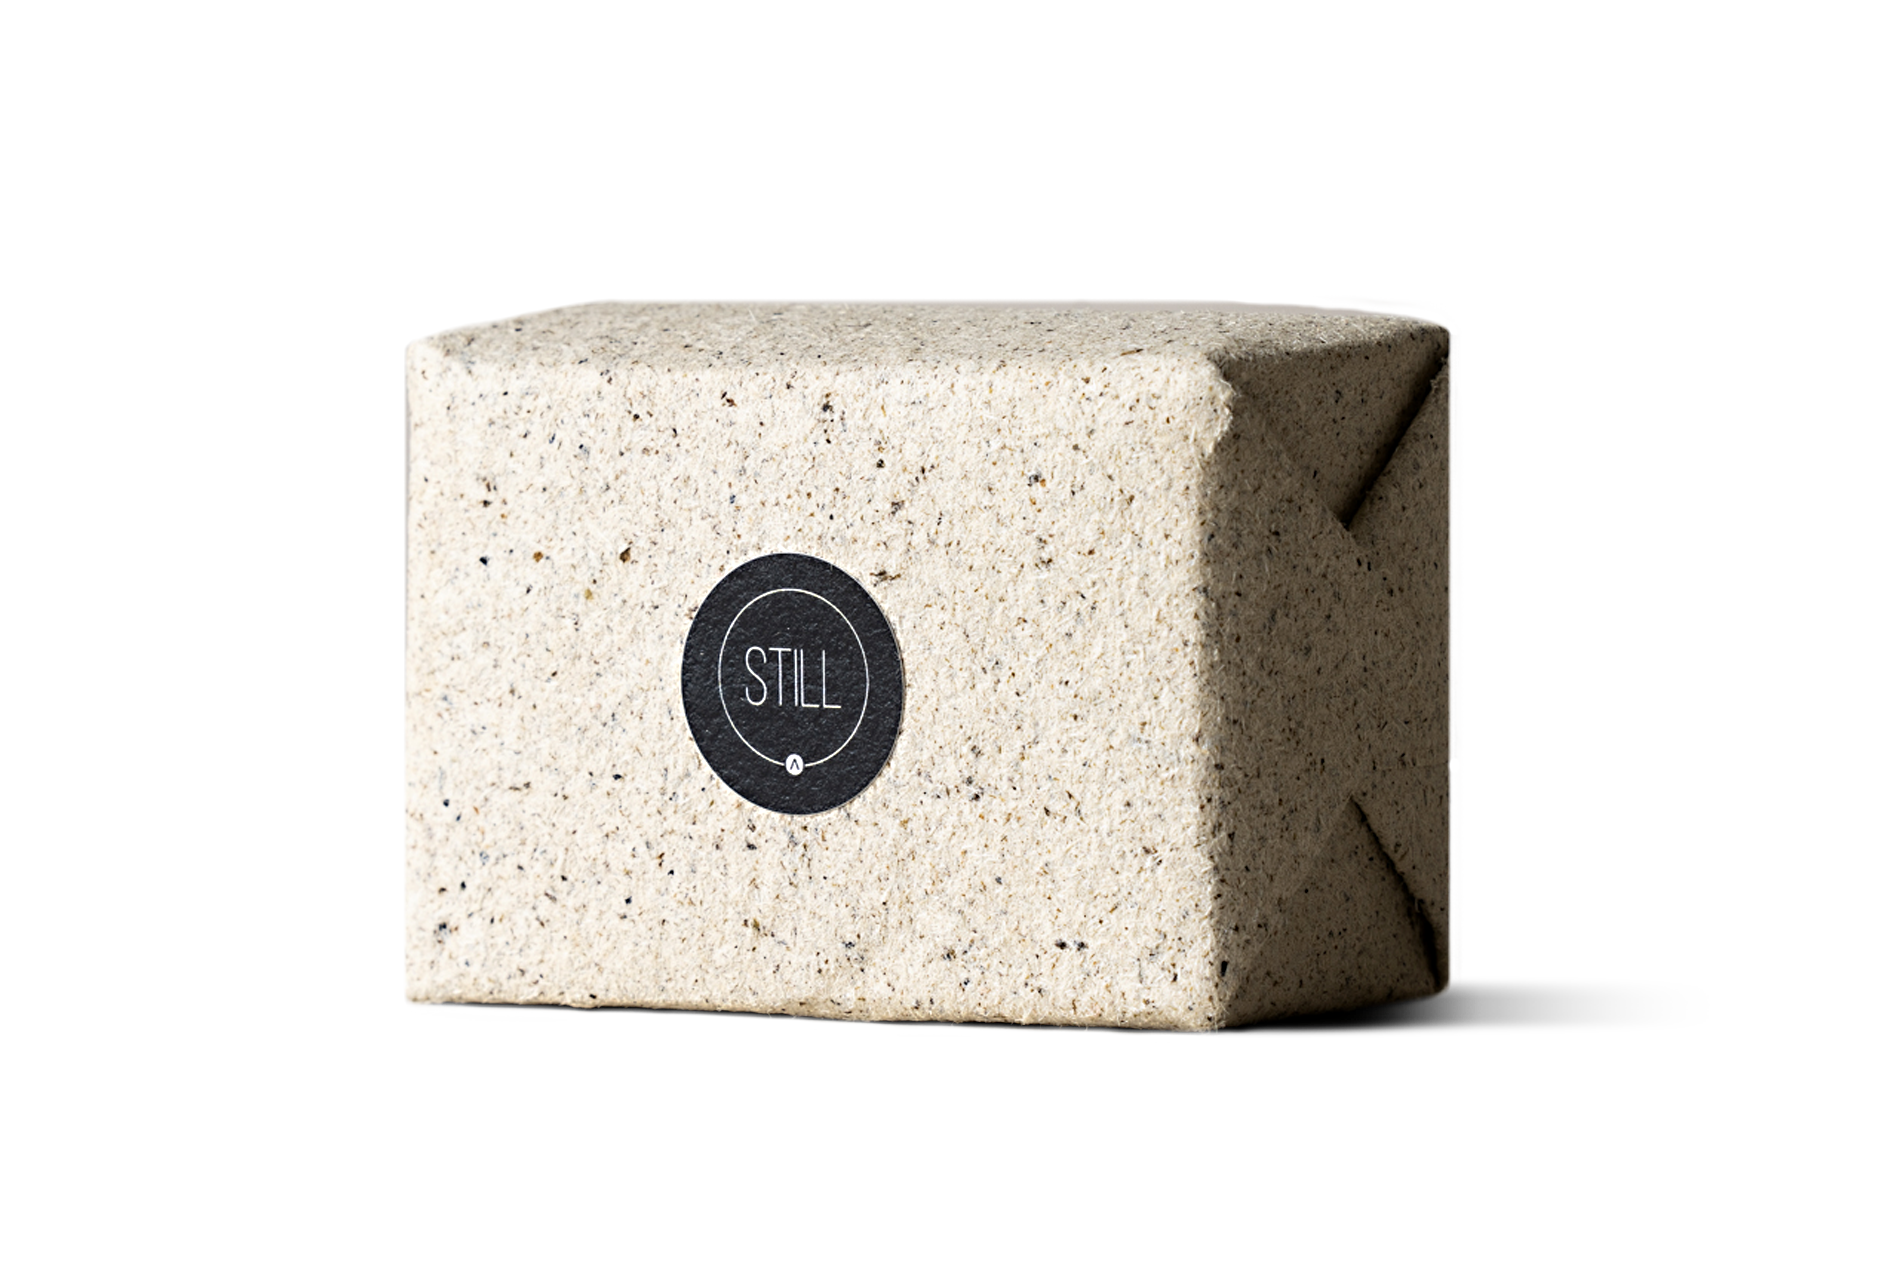 Still Exfoliating Black Soap Block contains Shea Butter, Plant Ash and Aloe Vera to create a luxurious soap block for the body that will gently exfoliate away dead skin cells and leave the skin looking bright and fresh. Powerful natural ingredients to create a vegan soap bar block. Woody, citrus natural soap bar.